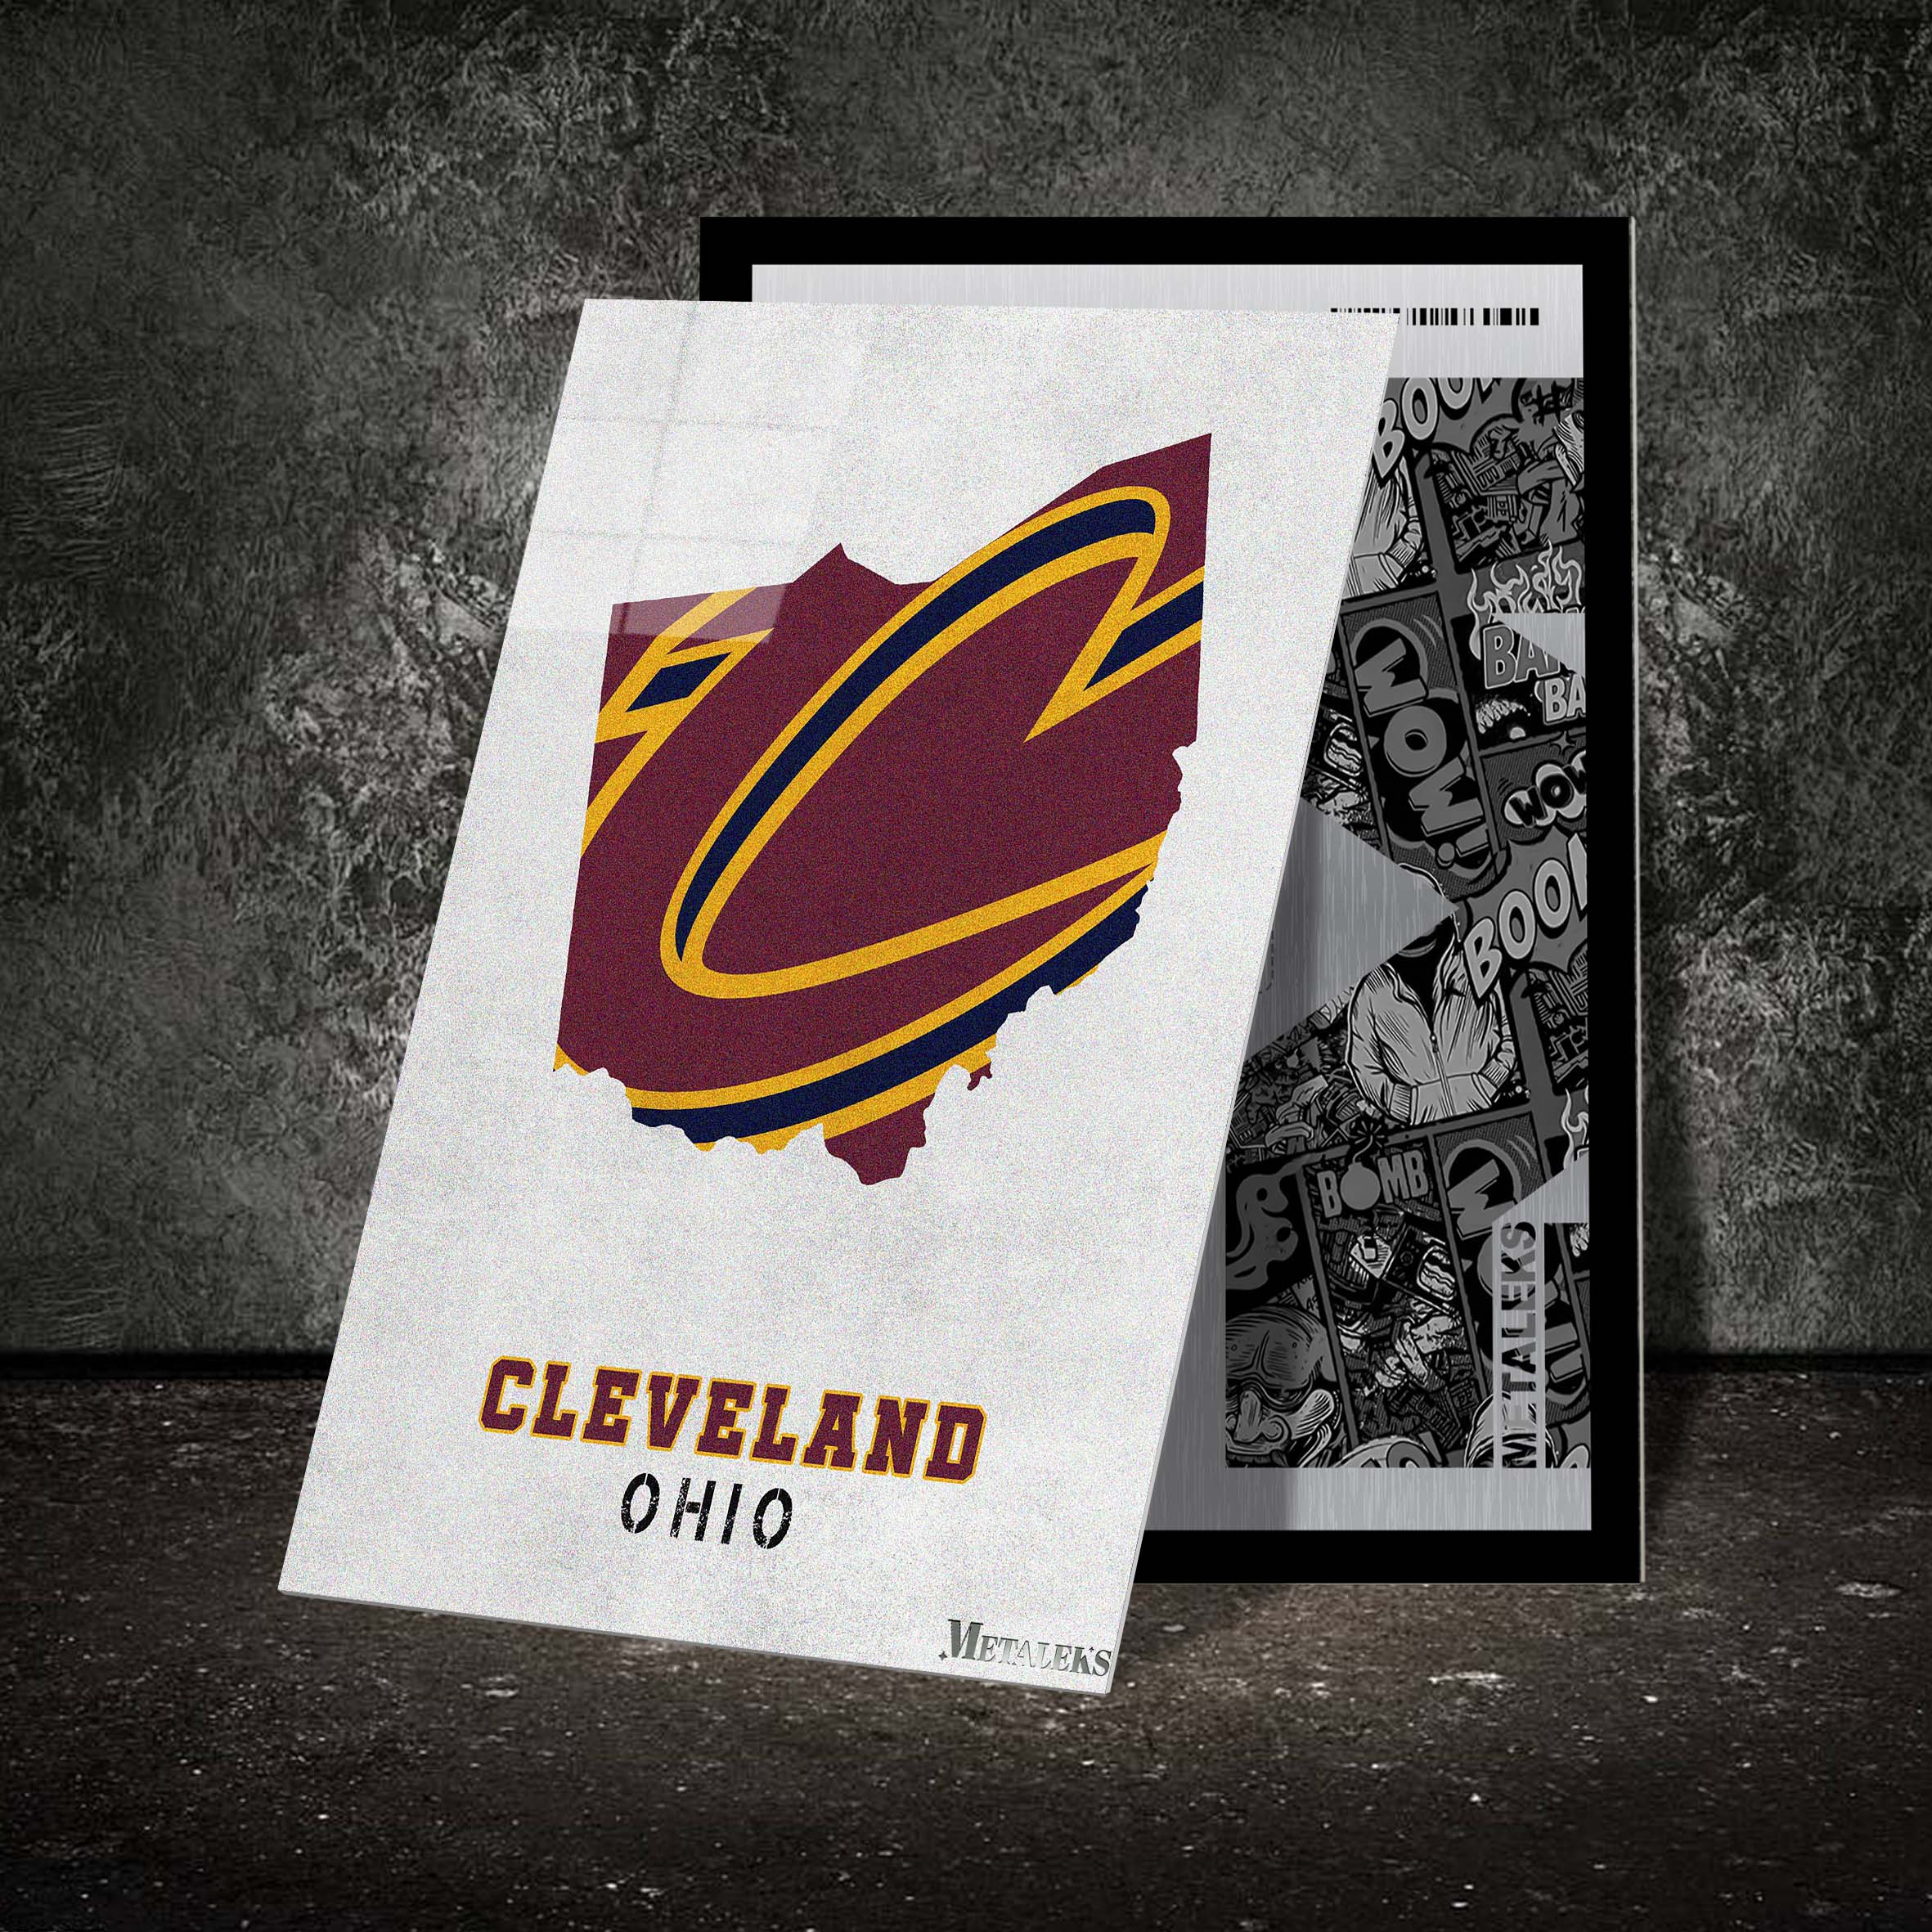 Cleveland Cavaliers Cleveland Ohio State Map-designed by @Hoang Van Thuan